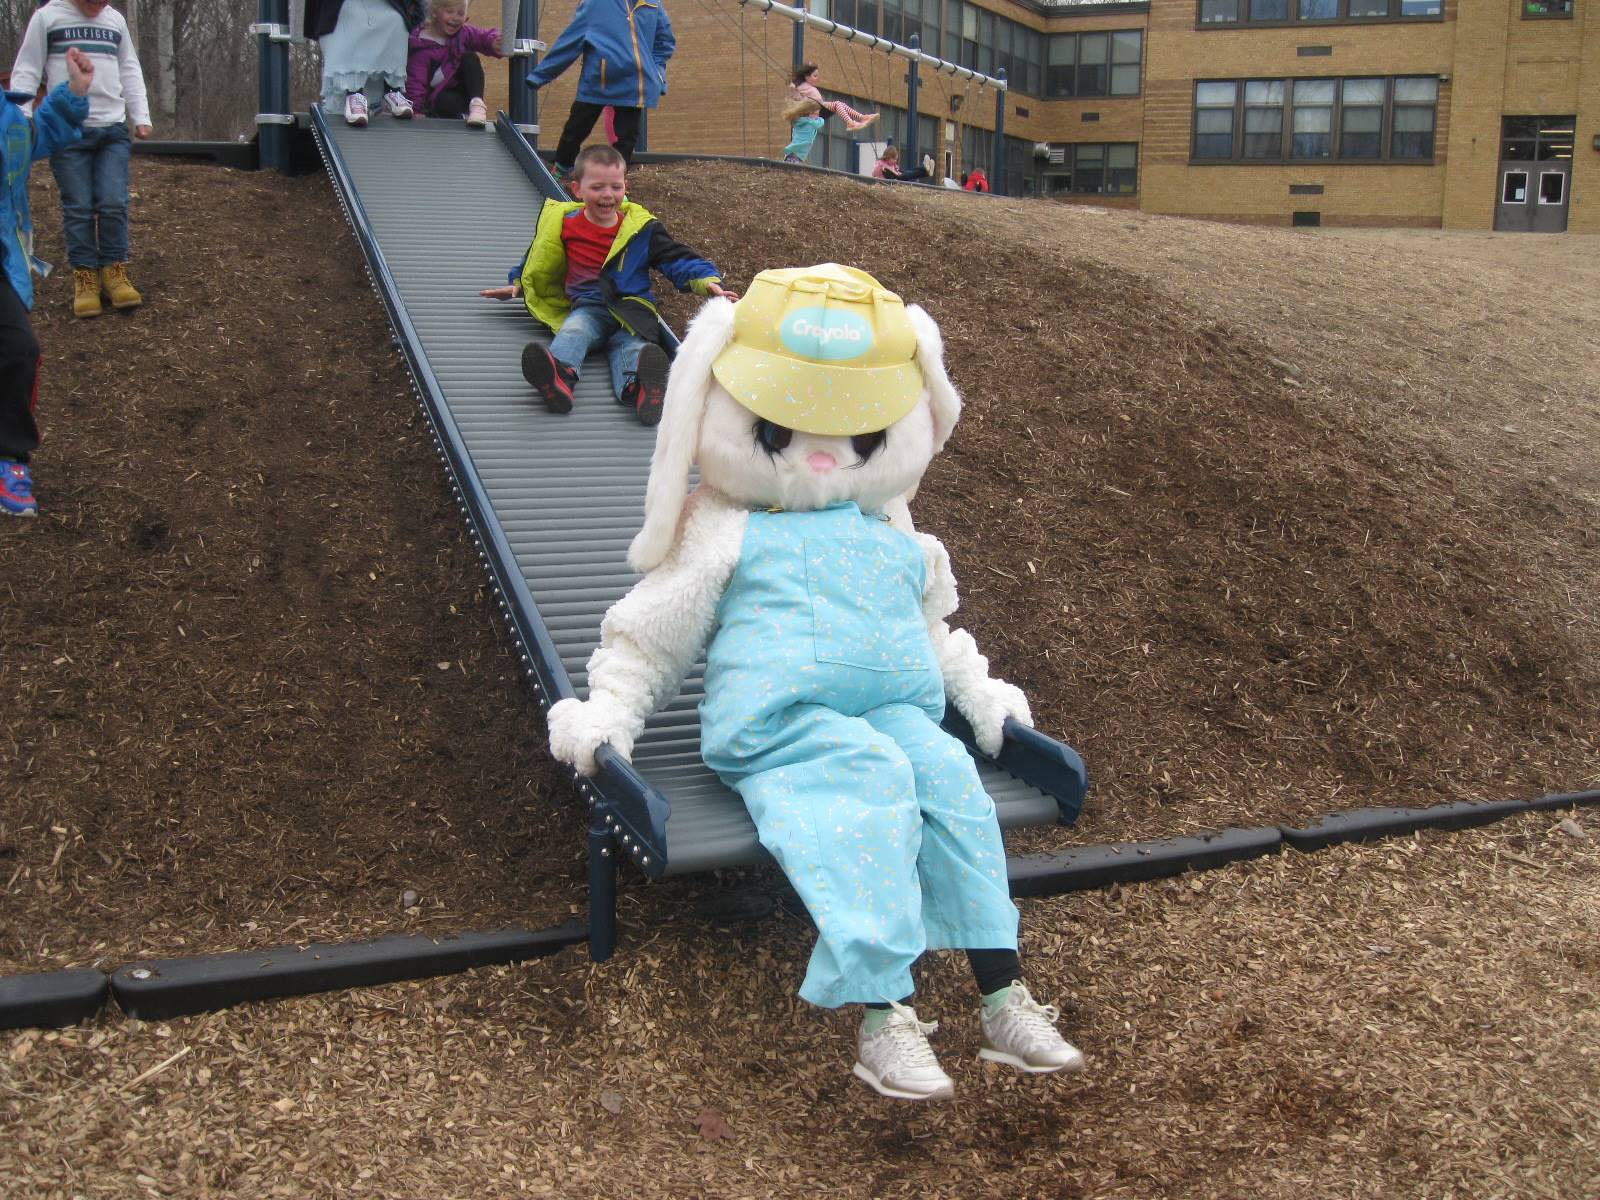 Easter Bunny and students slide together!